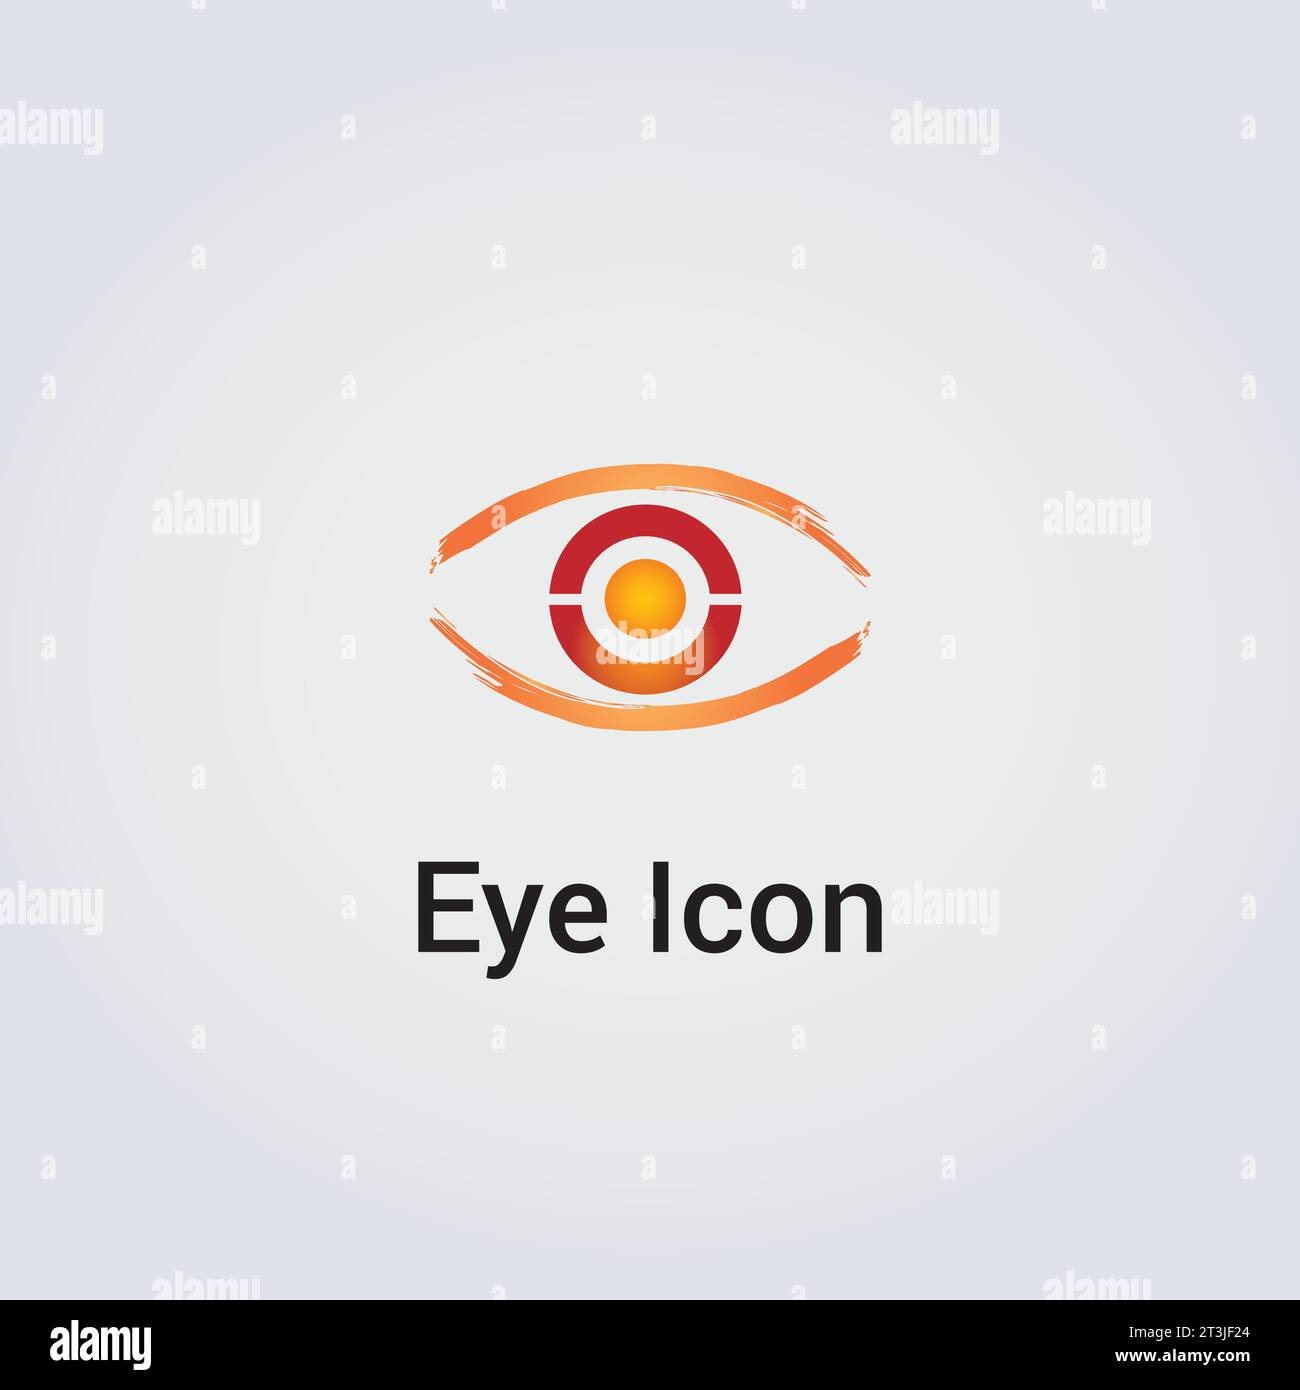 Eye Icon Logo Design - Abstract Template Various Shapes Colors Circle Wheel Beauty Emblem Symbol - Corporate Identity for Business Stock Vector